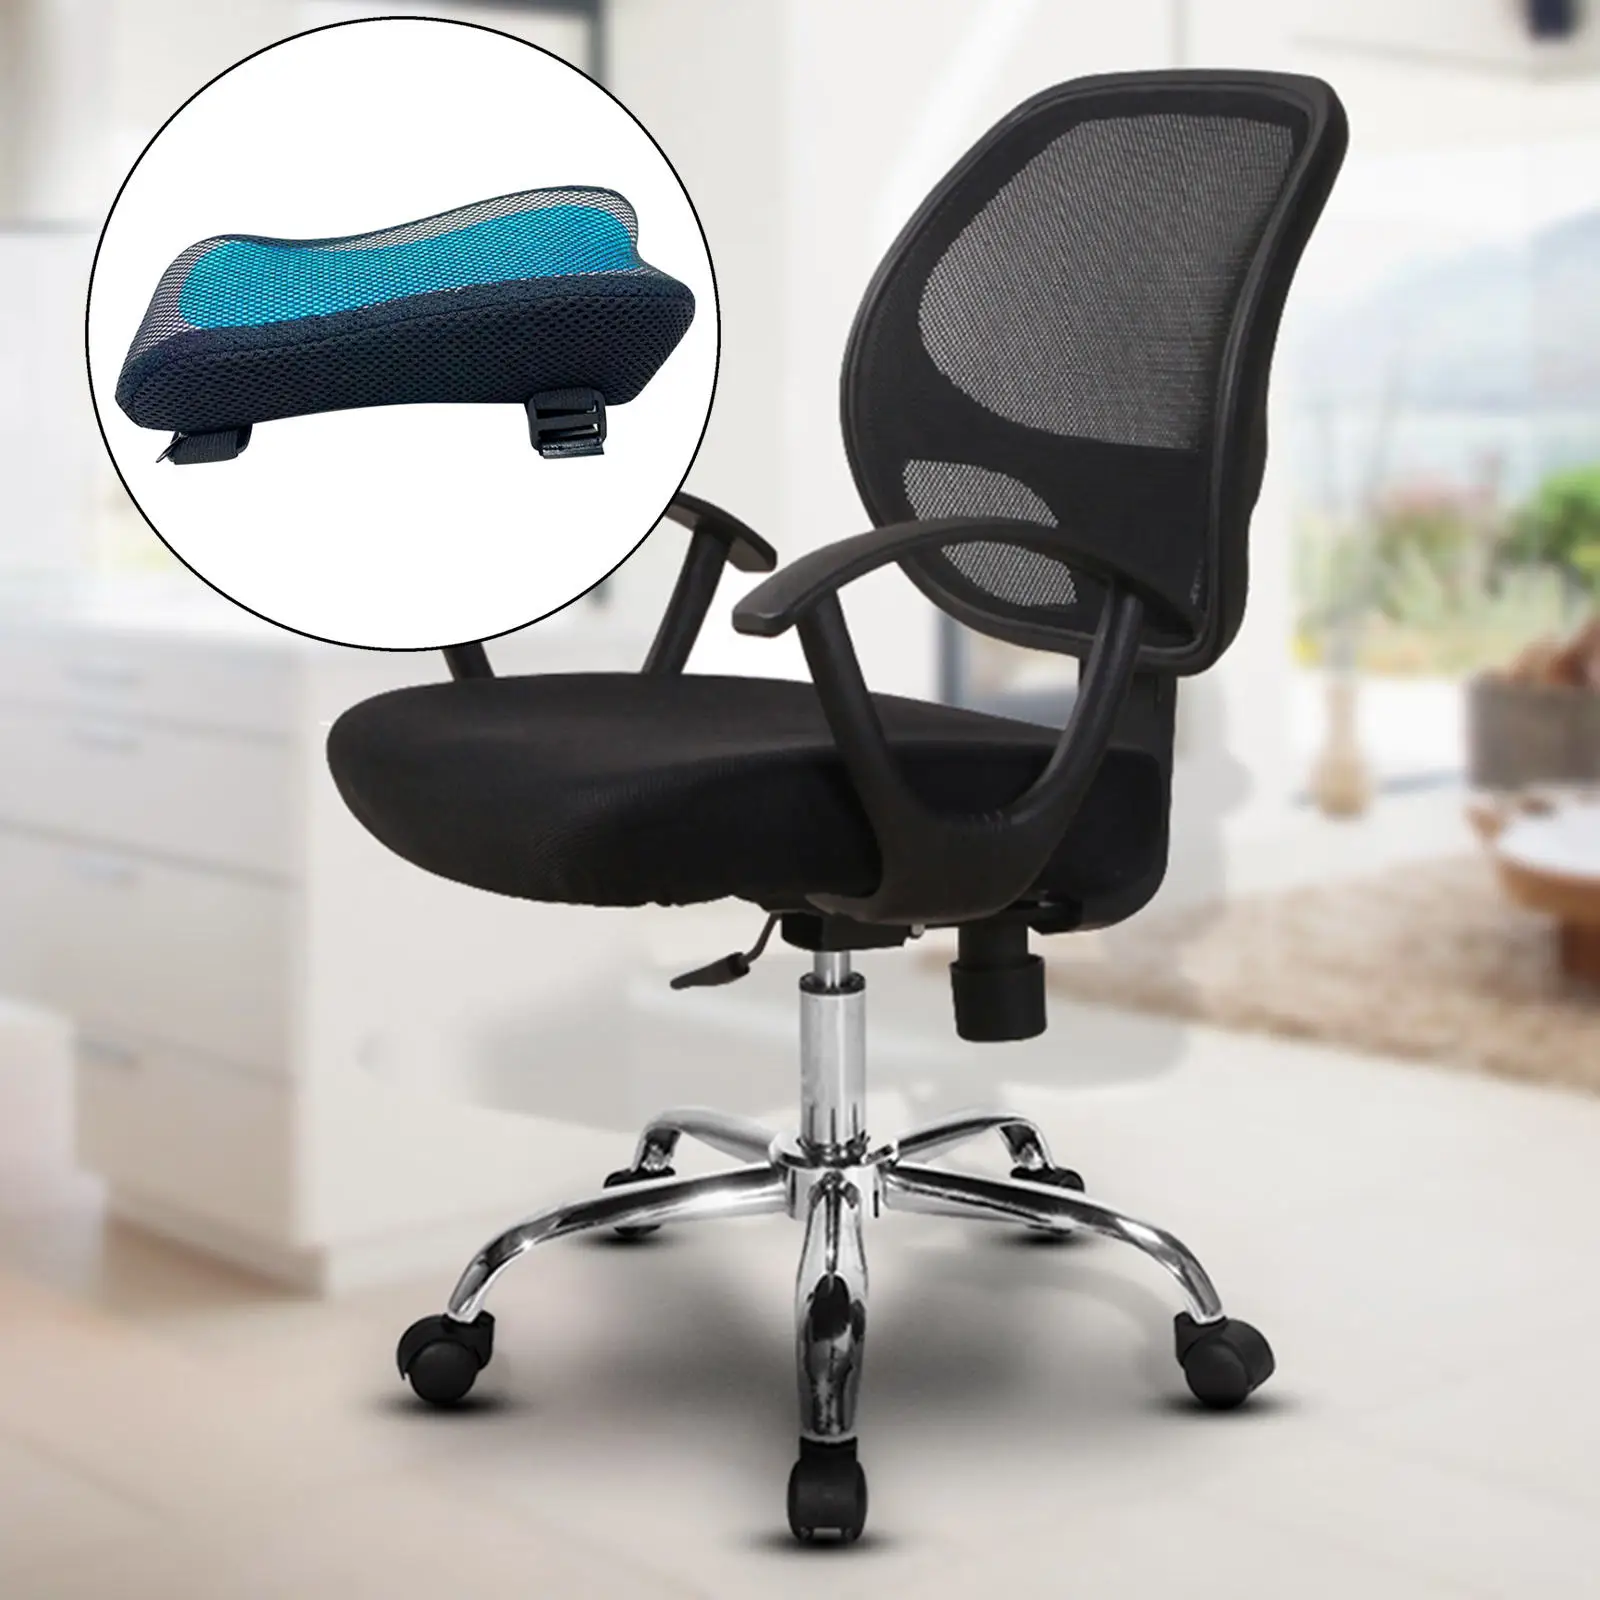 2 Pieces PIEHIK Comfortable Desk and Chair Armrest Cushion Office Chair Cushion Ergonomics Computer Game Chair Armrest Cushion with Memory Rebound 